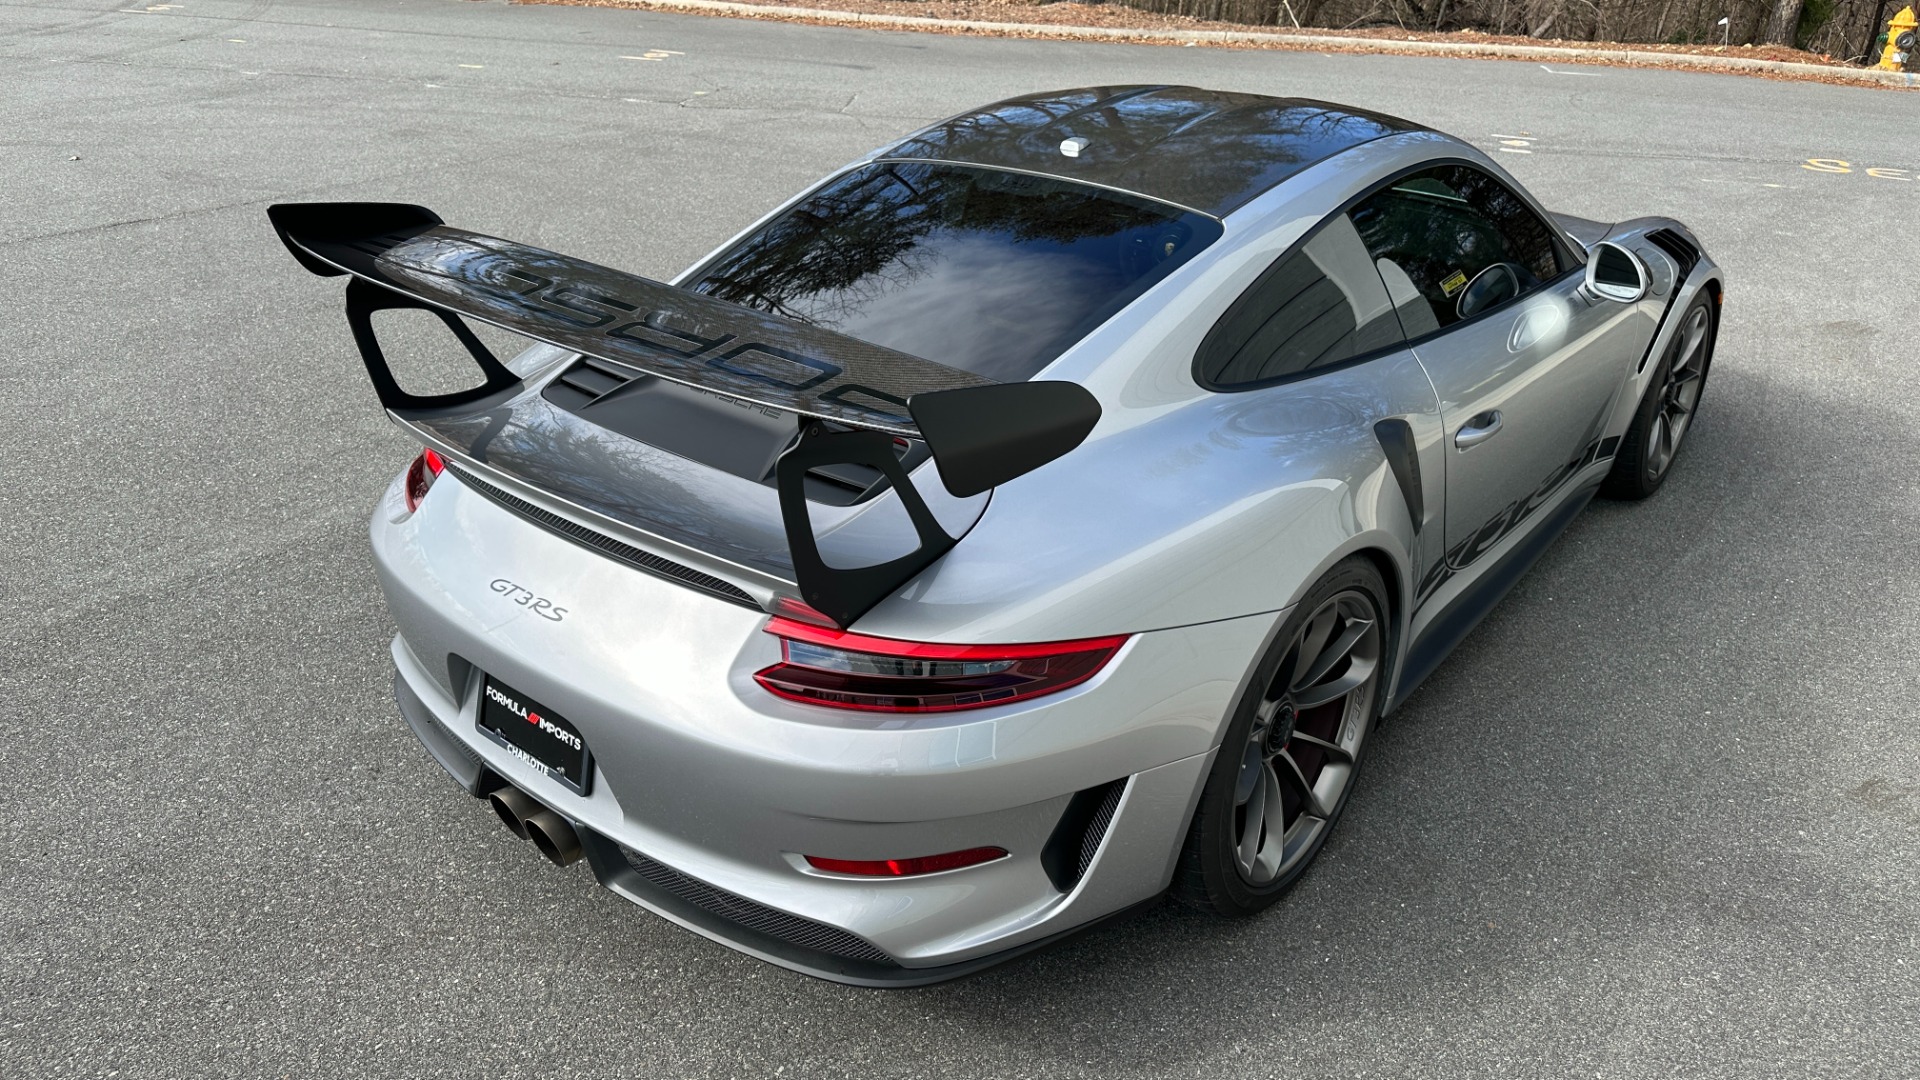 Used 2019 Porsche 911 GT3 RS WEISSACH / FULL XPEL PPF / DUNDON HEADERS / EXHAUST / FRONT LIFT for sale $248,999 at Formula Imports in Charlotte NC 28227 5